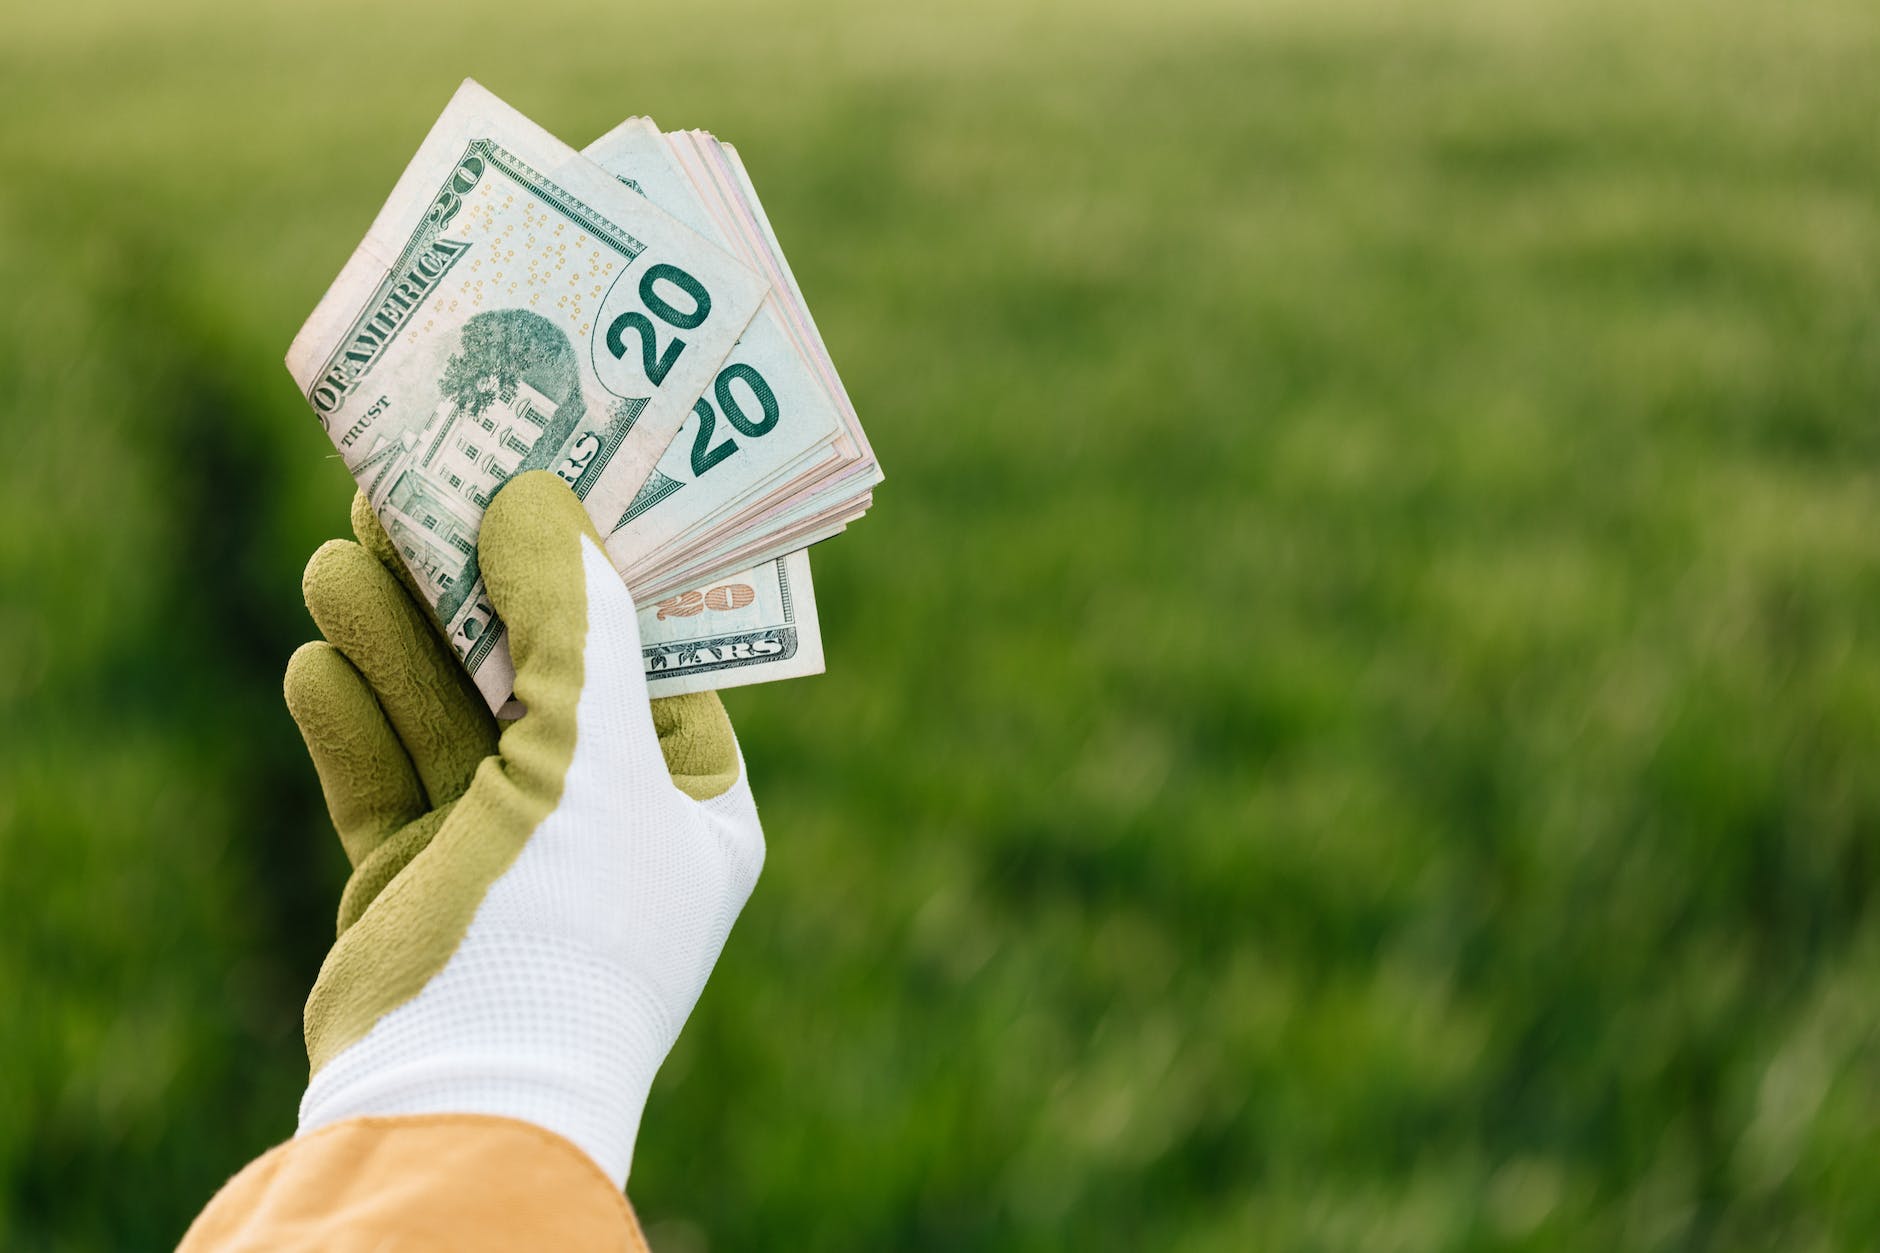 crop faceless grower in glows with dollar banknotes near grass